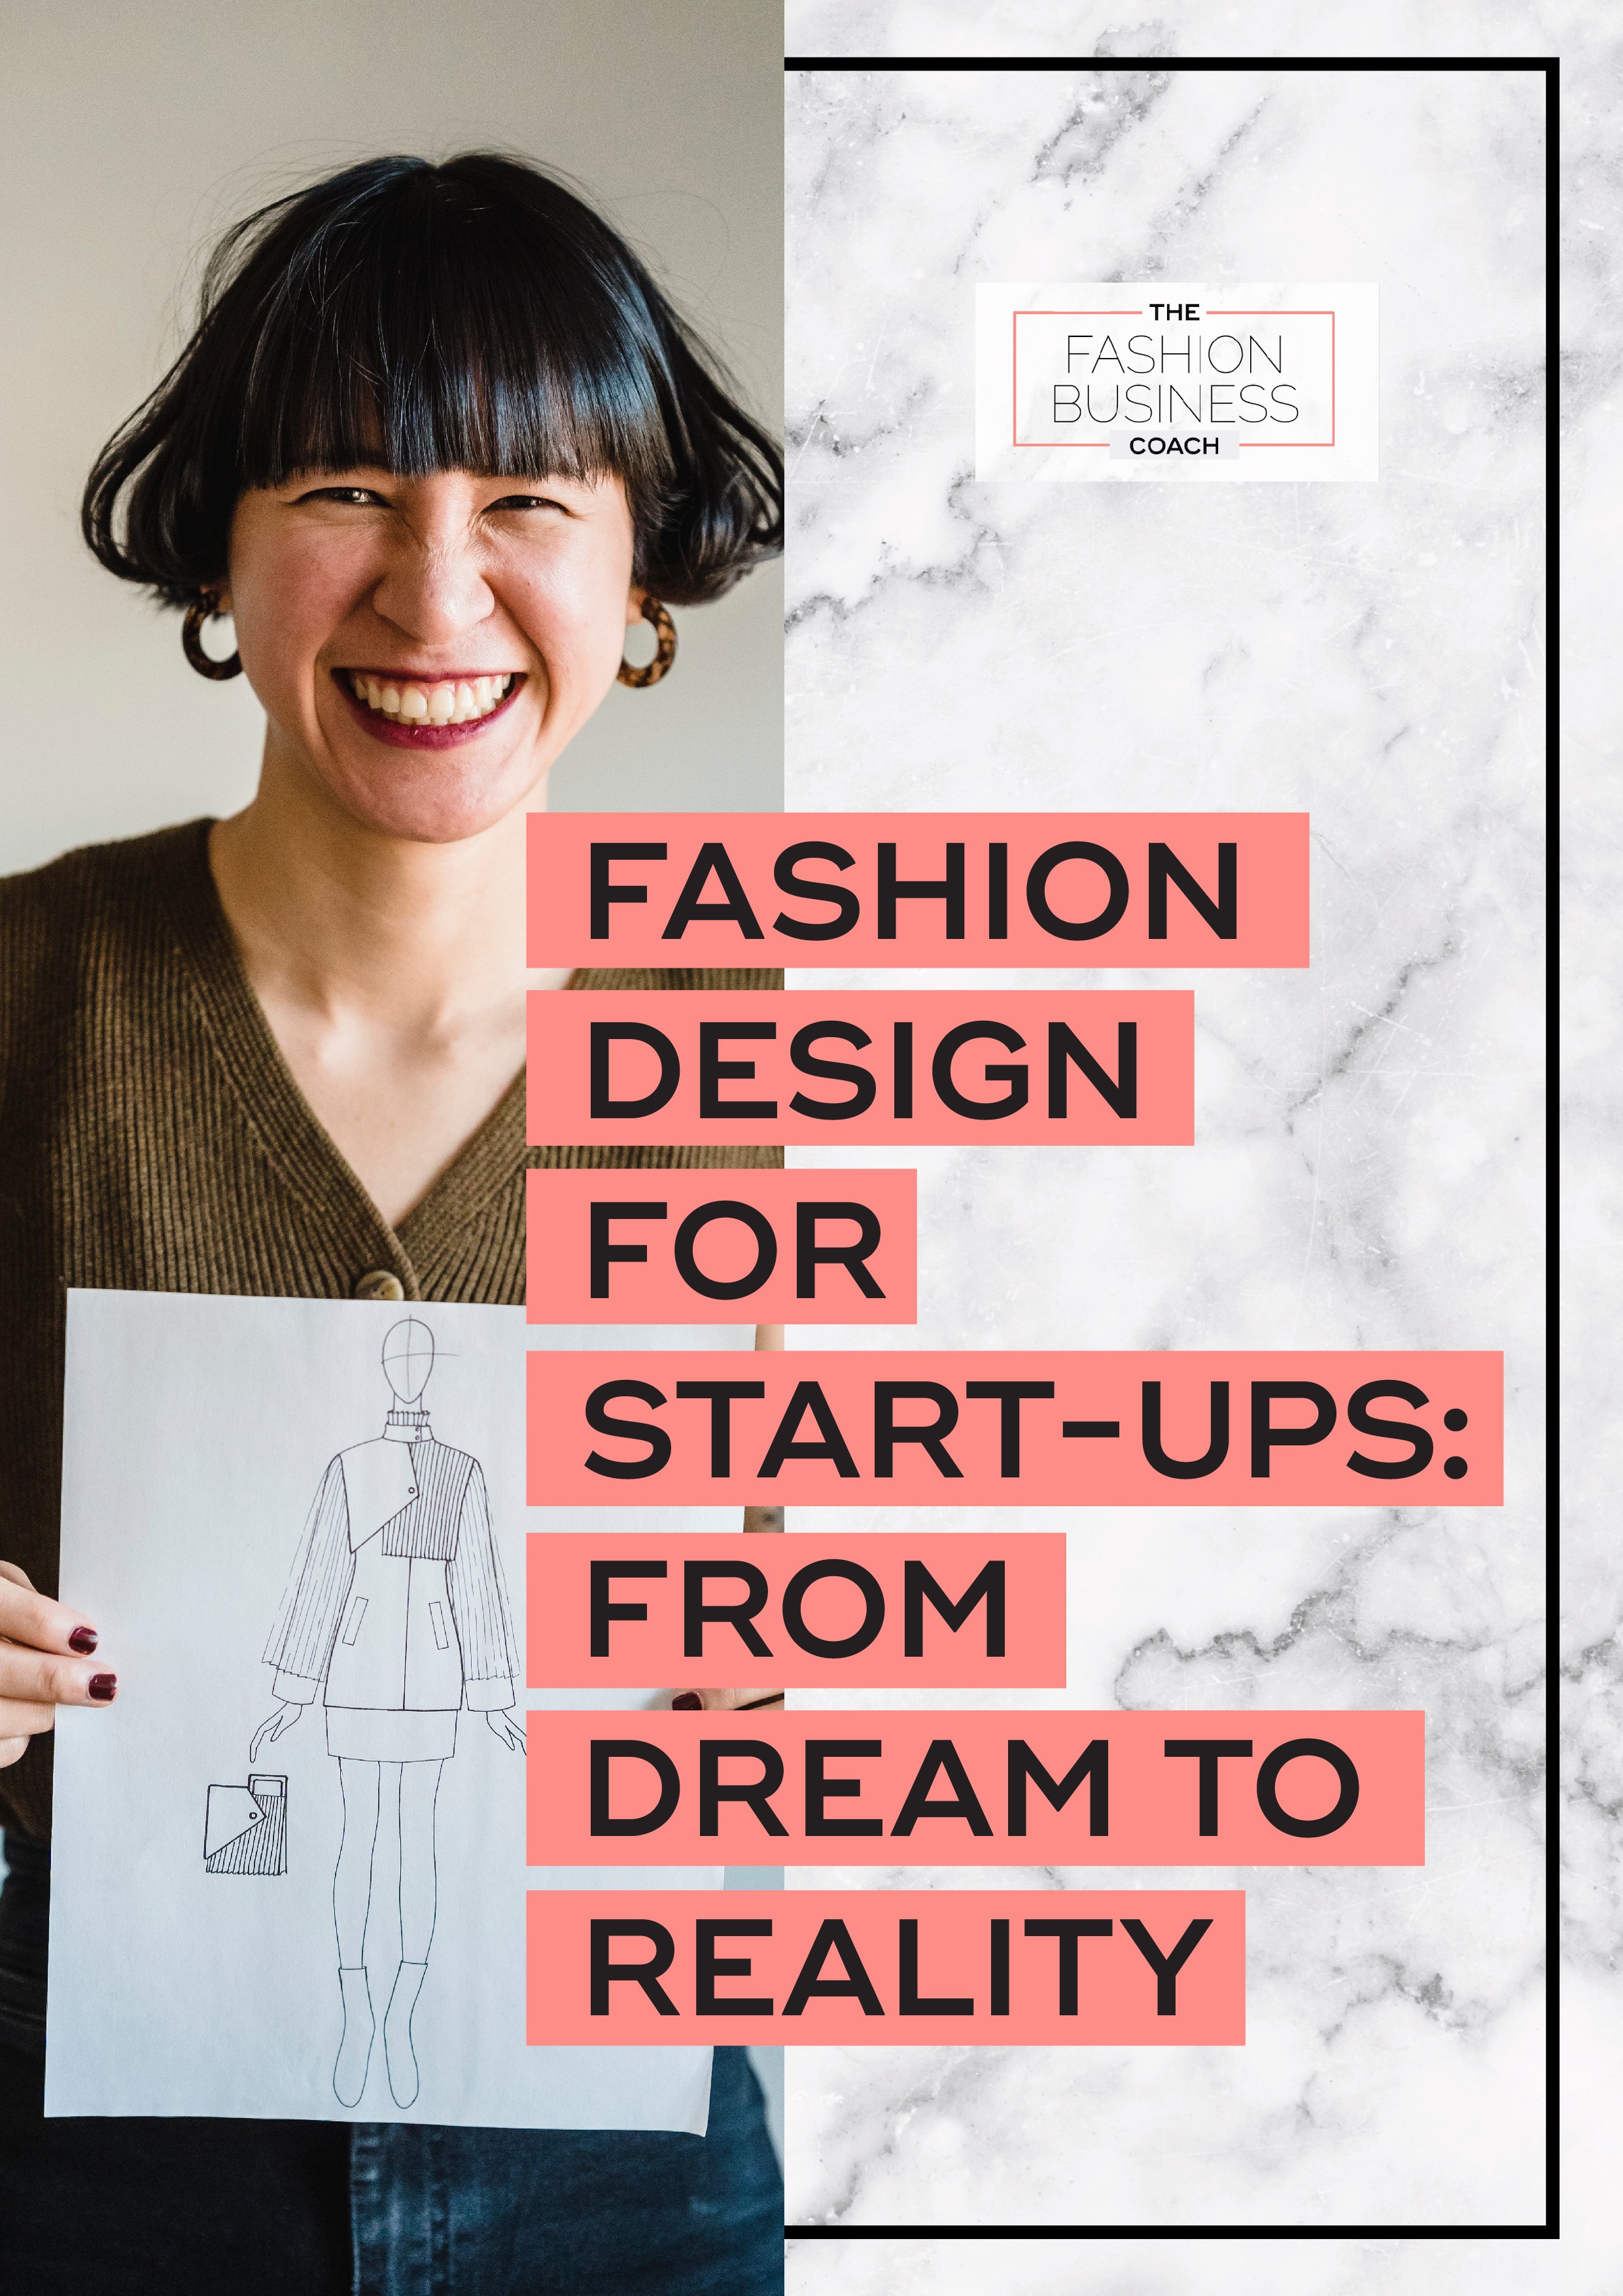 Pinterest_Fashion Design for Start-ups- From Dream to Reality 2.jpg